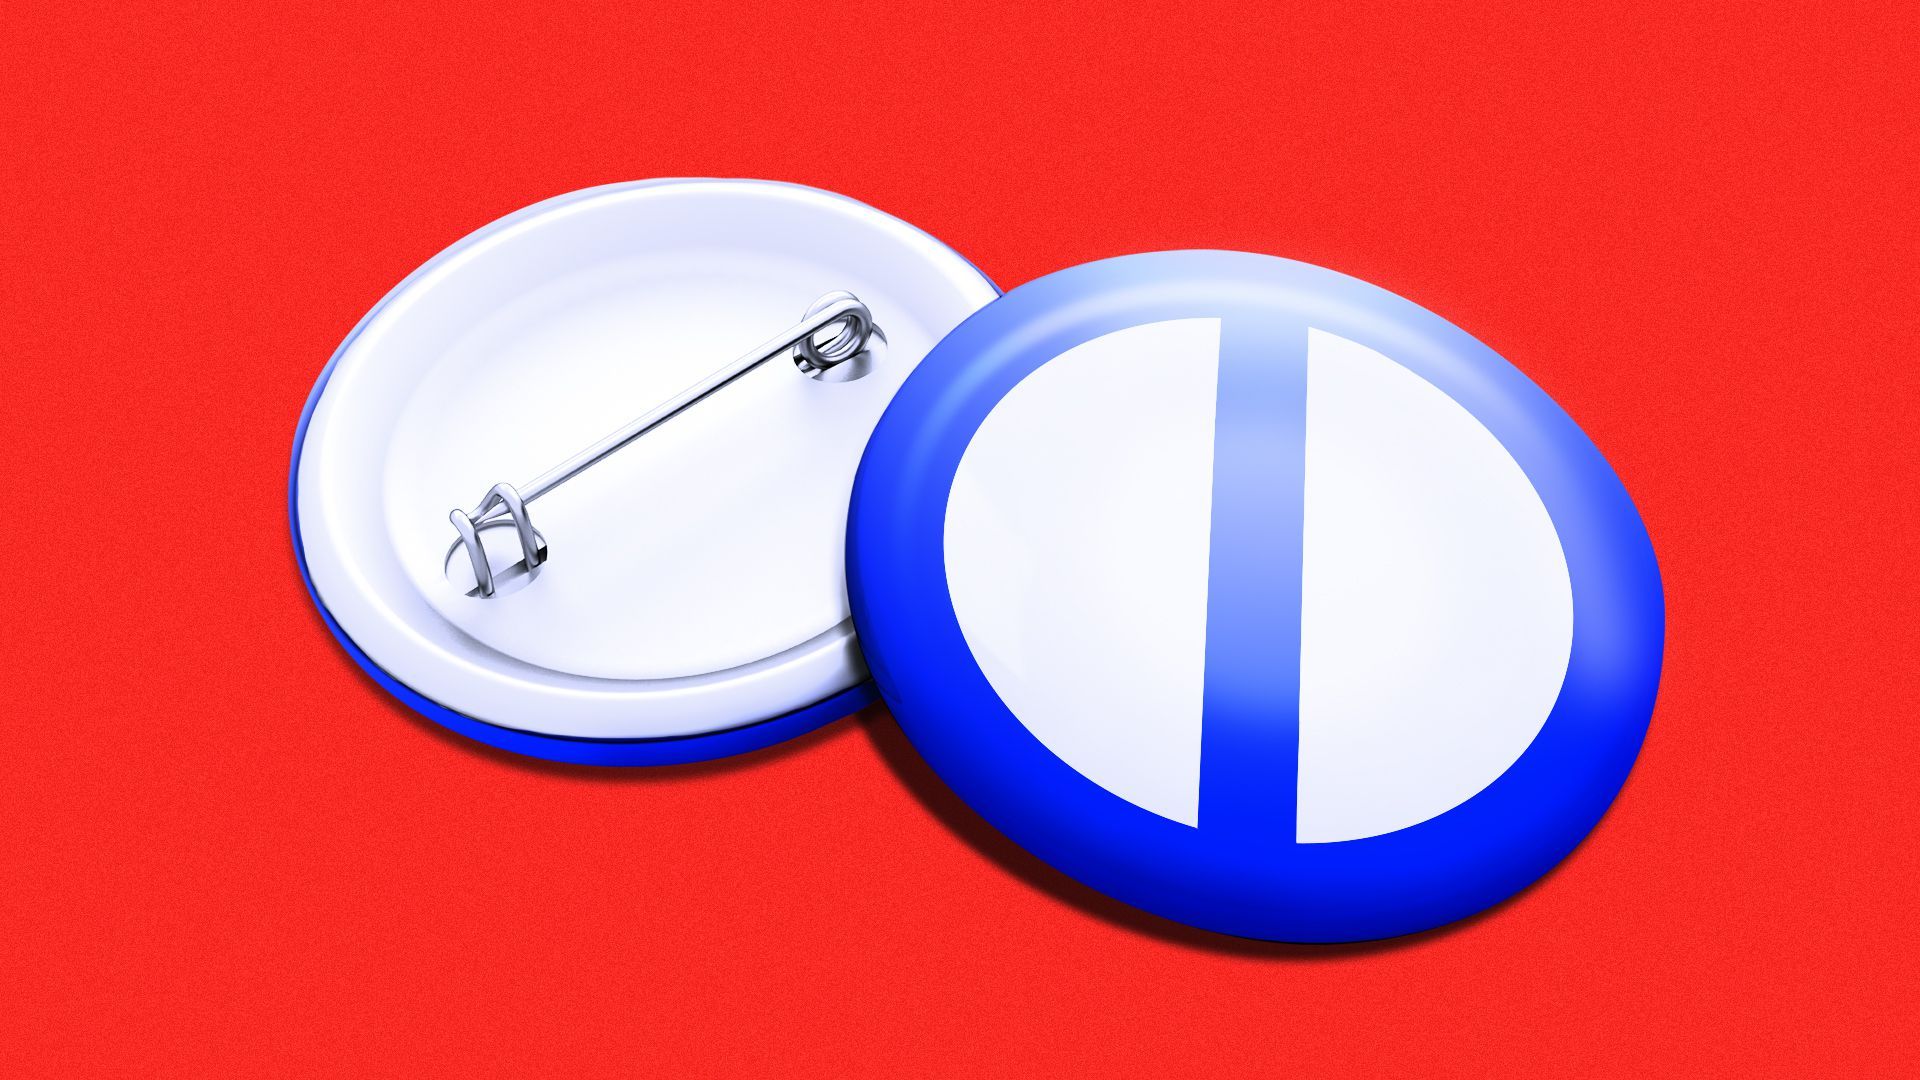 Illustration of two buttons, with one featuring a "no" icon in blue